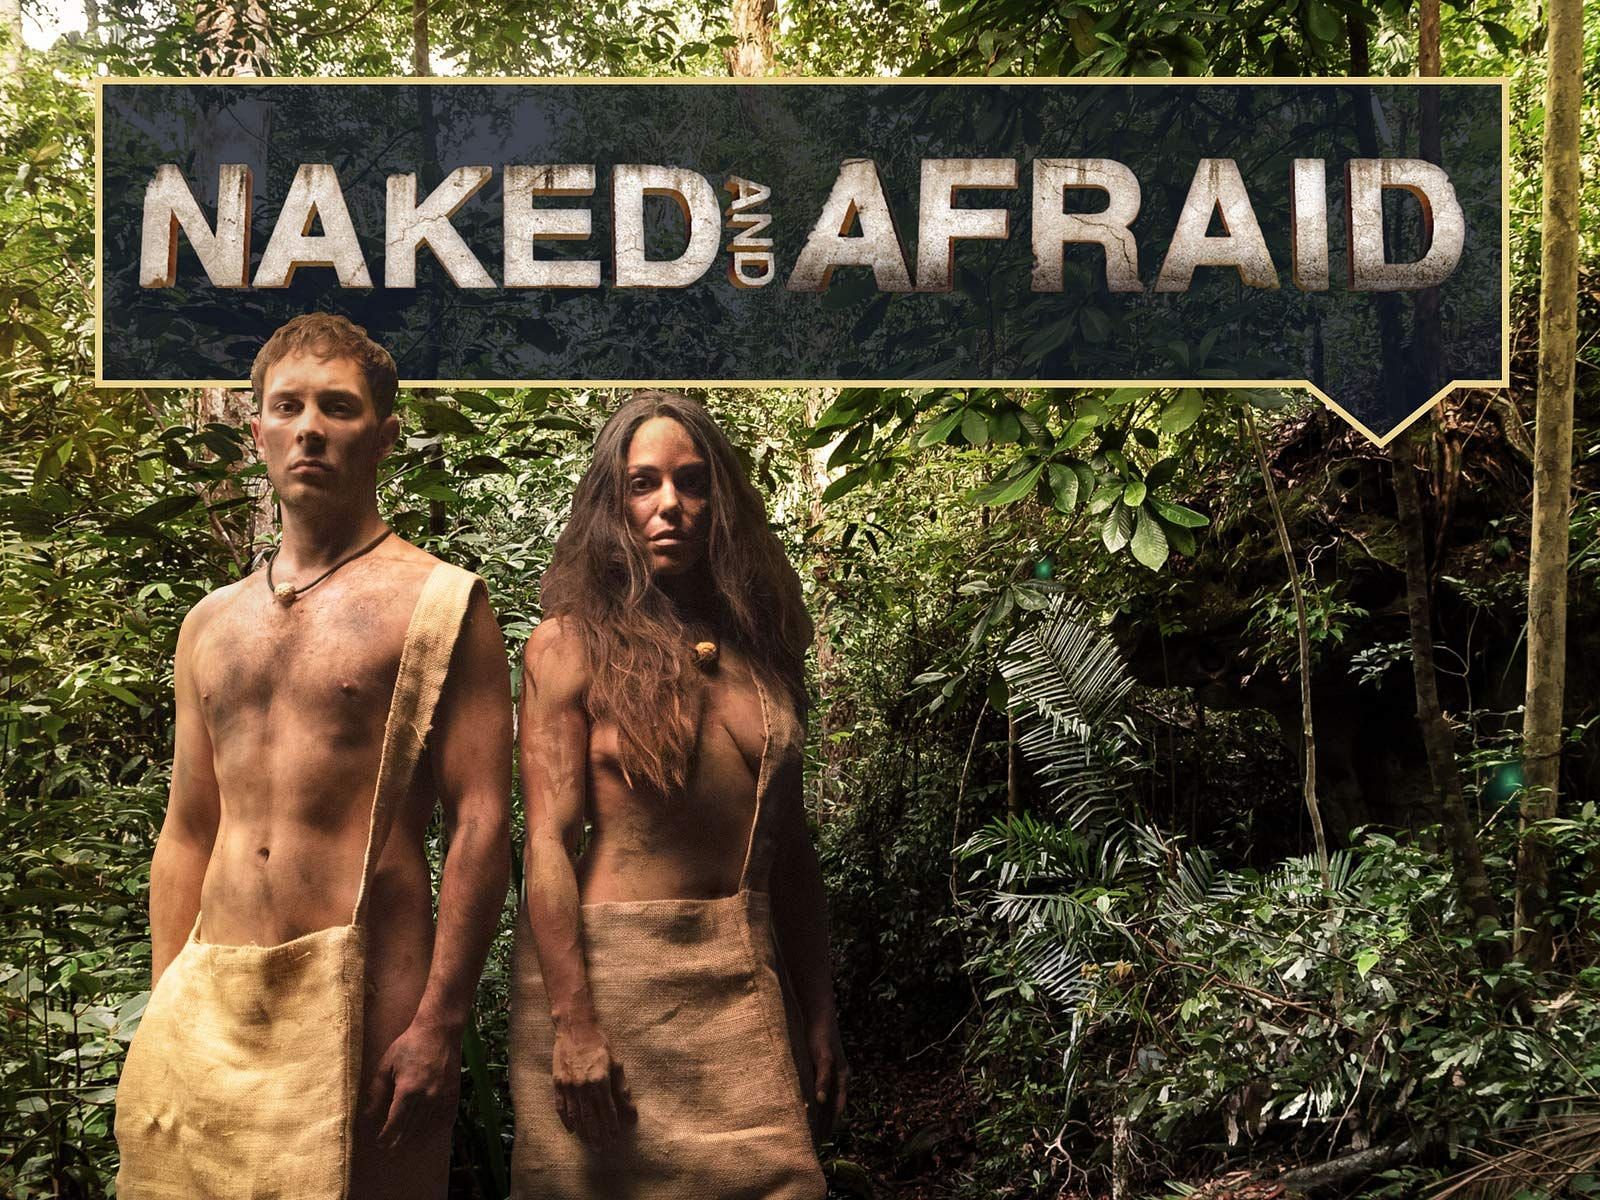 Naked and Afraid (Image via Discovery Channel)